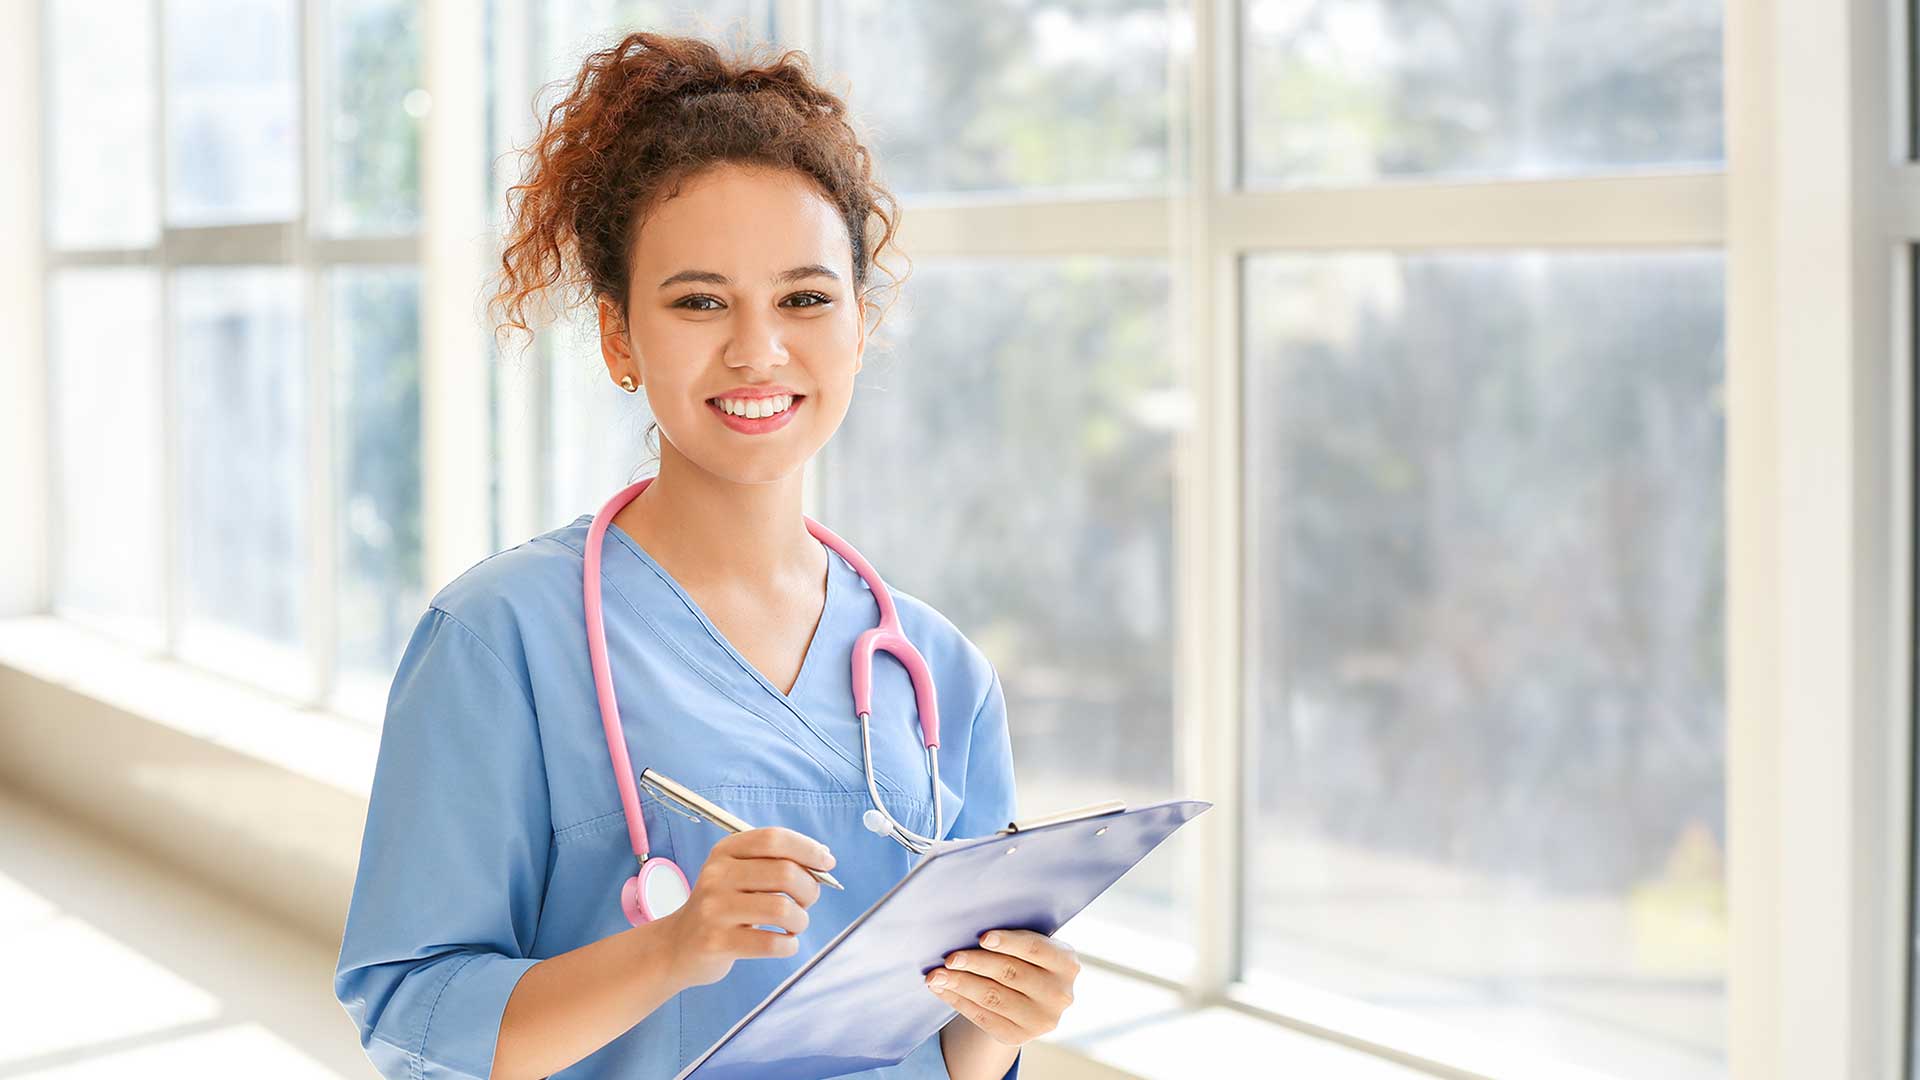 medical assistant near sunny window holding patient chart